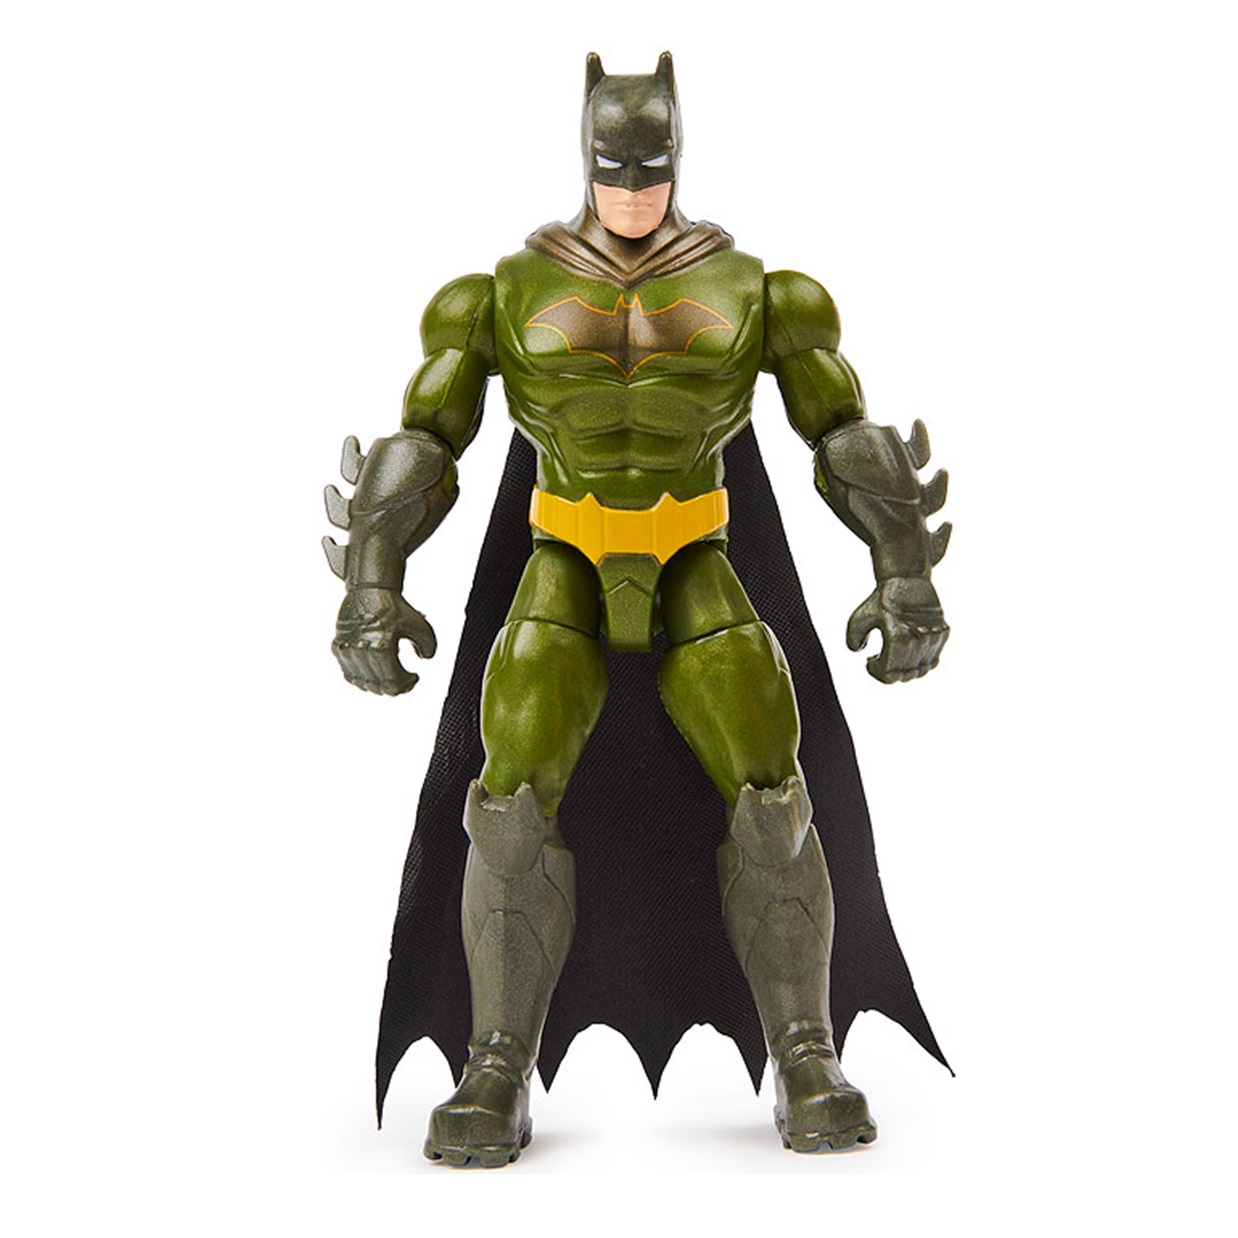 Batman Armor 1st Edition The Caped Crusader Spin Master 